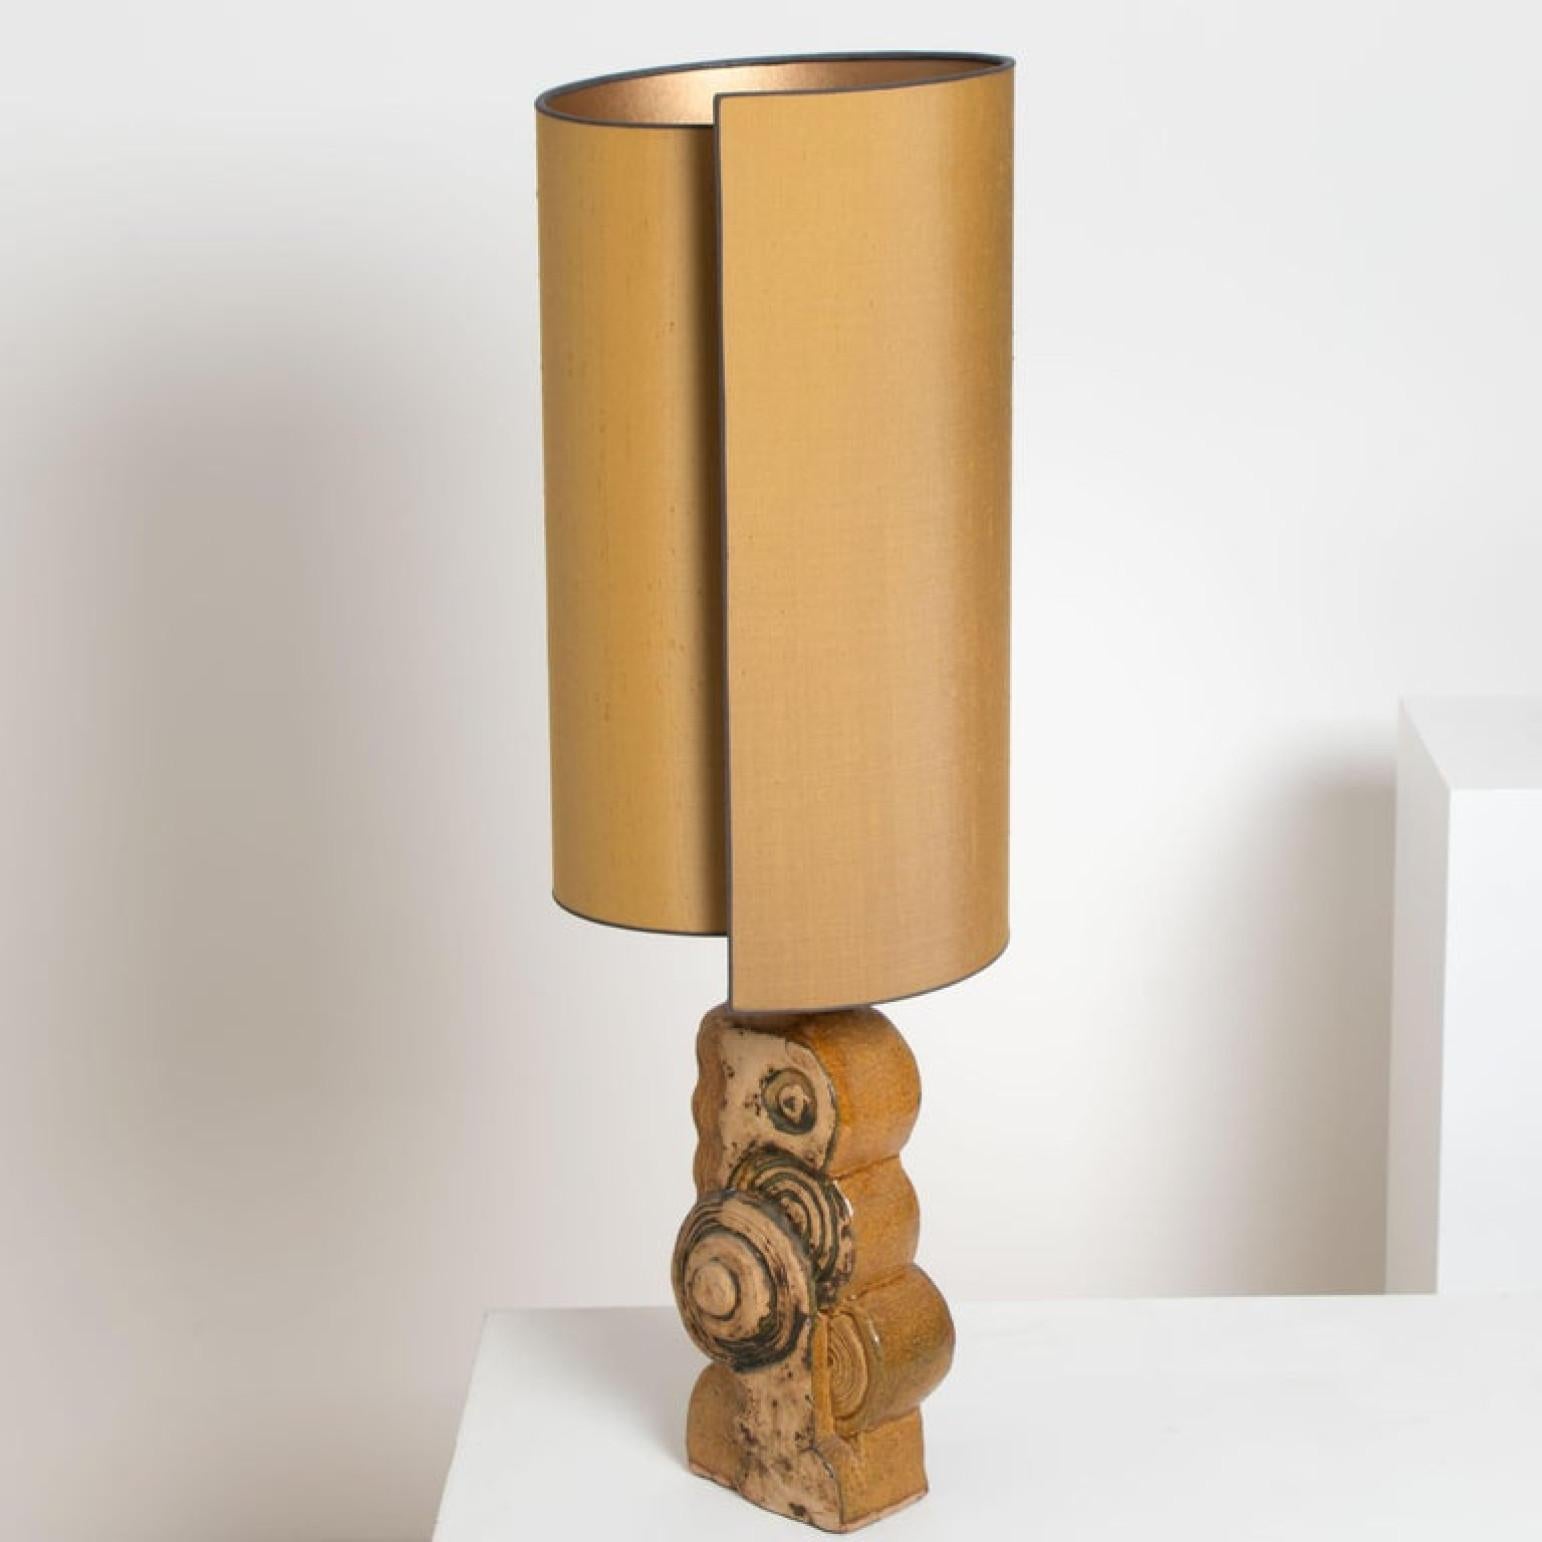 B. Rooke Ceramic Lamp with New Custom Made Lampshade by René Houben, 1960s For Sale 2